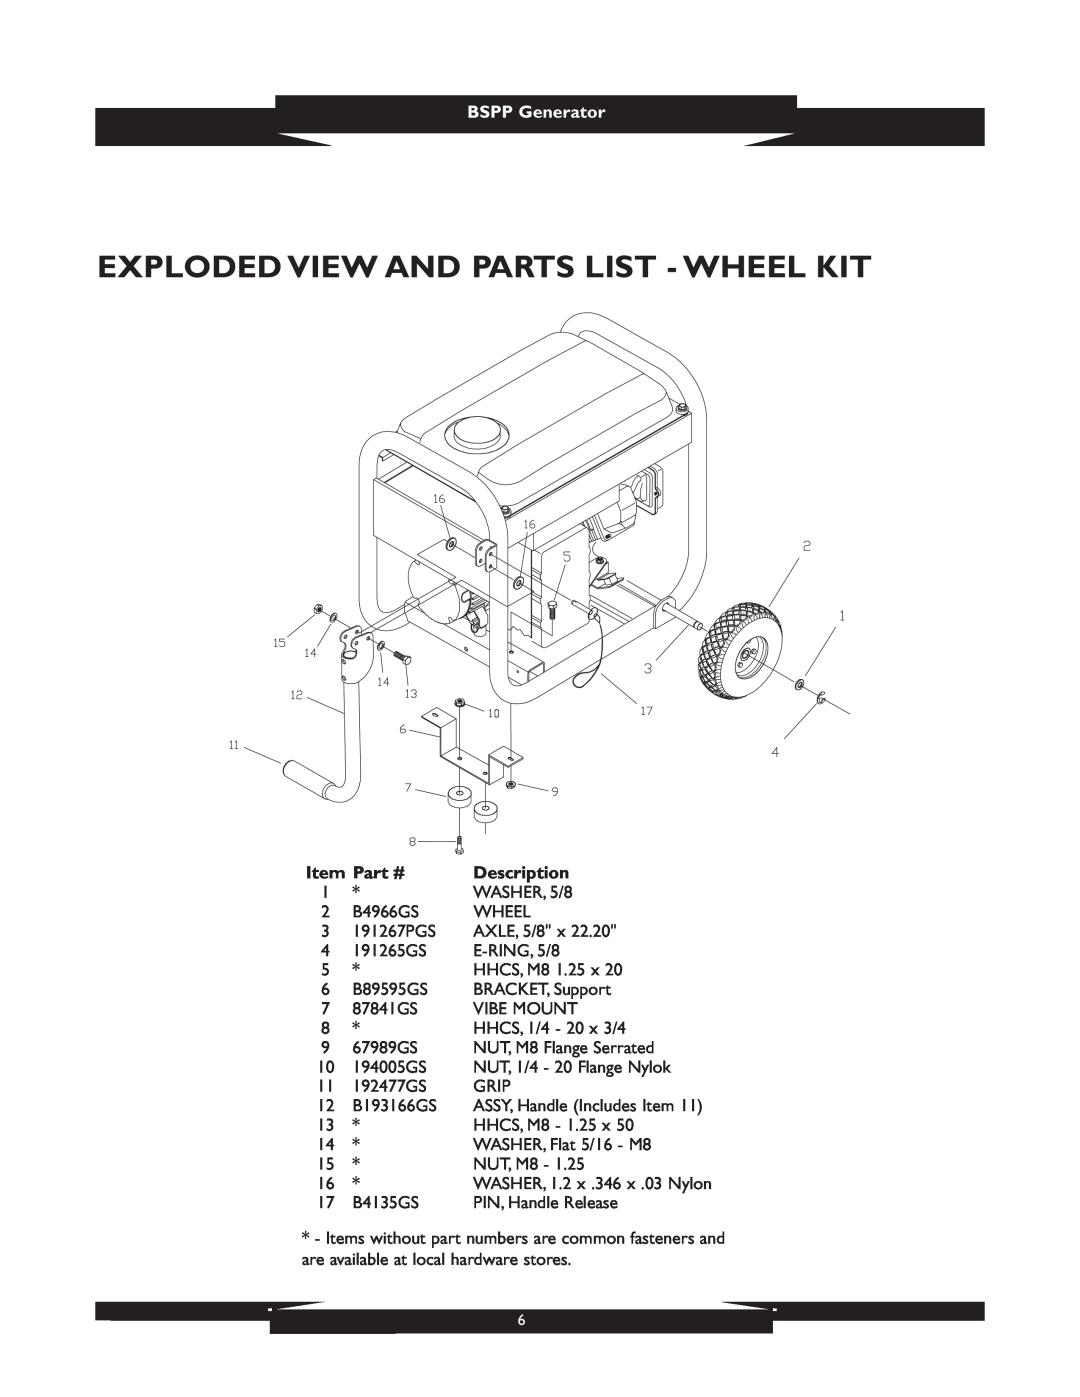 Briggs & Stratton 01933 manual Exploded View And Parts List - Wheel Kit, BSPP Generator, Description 